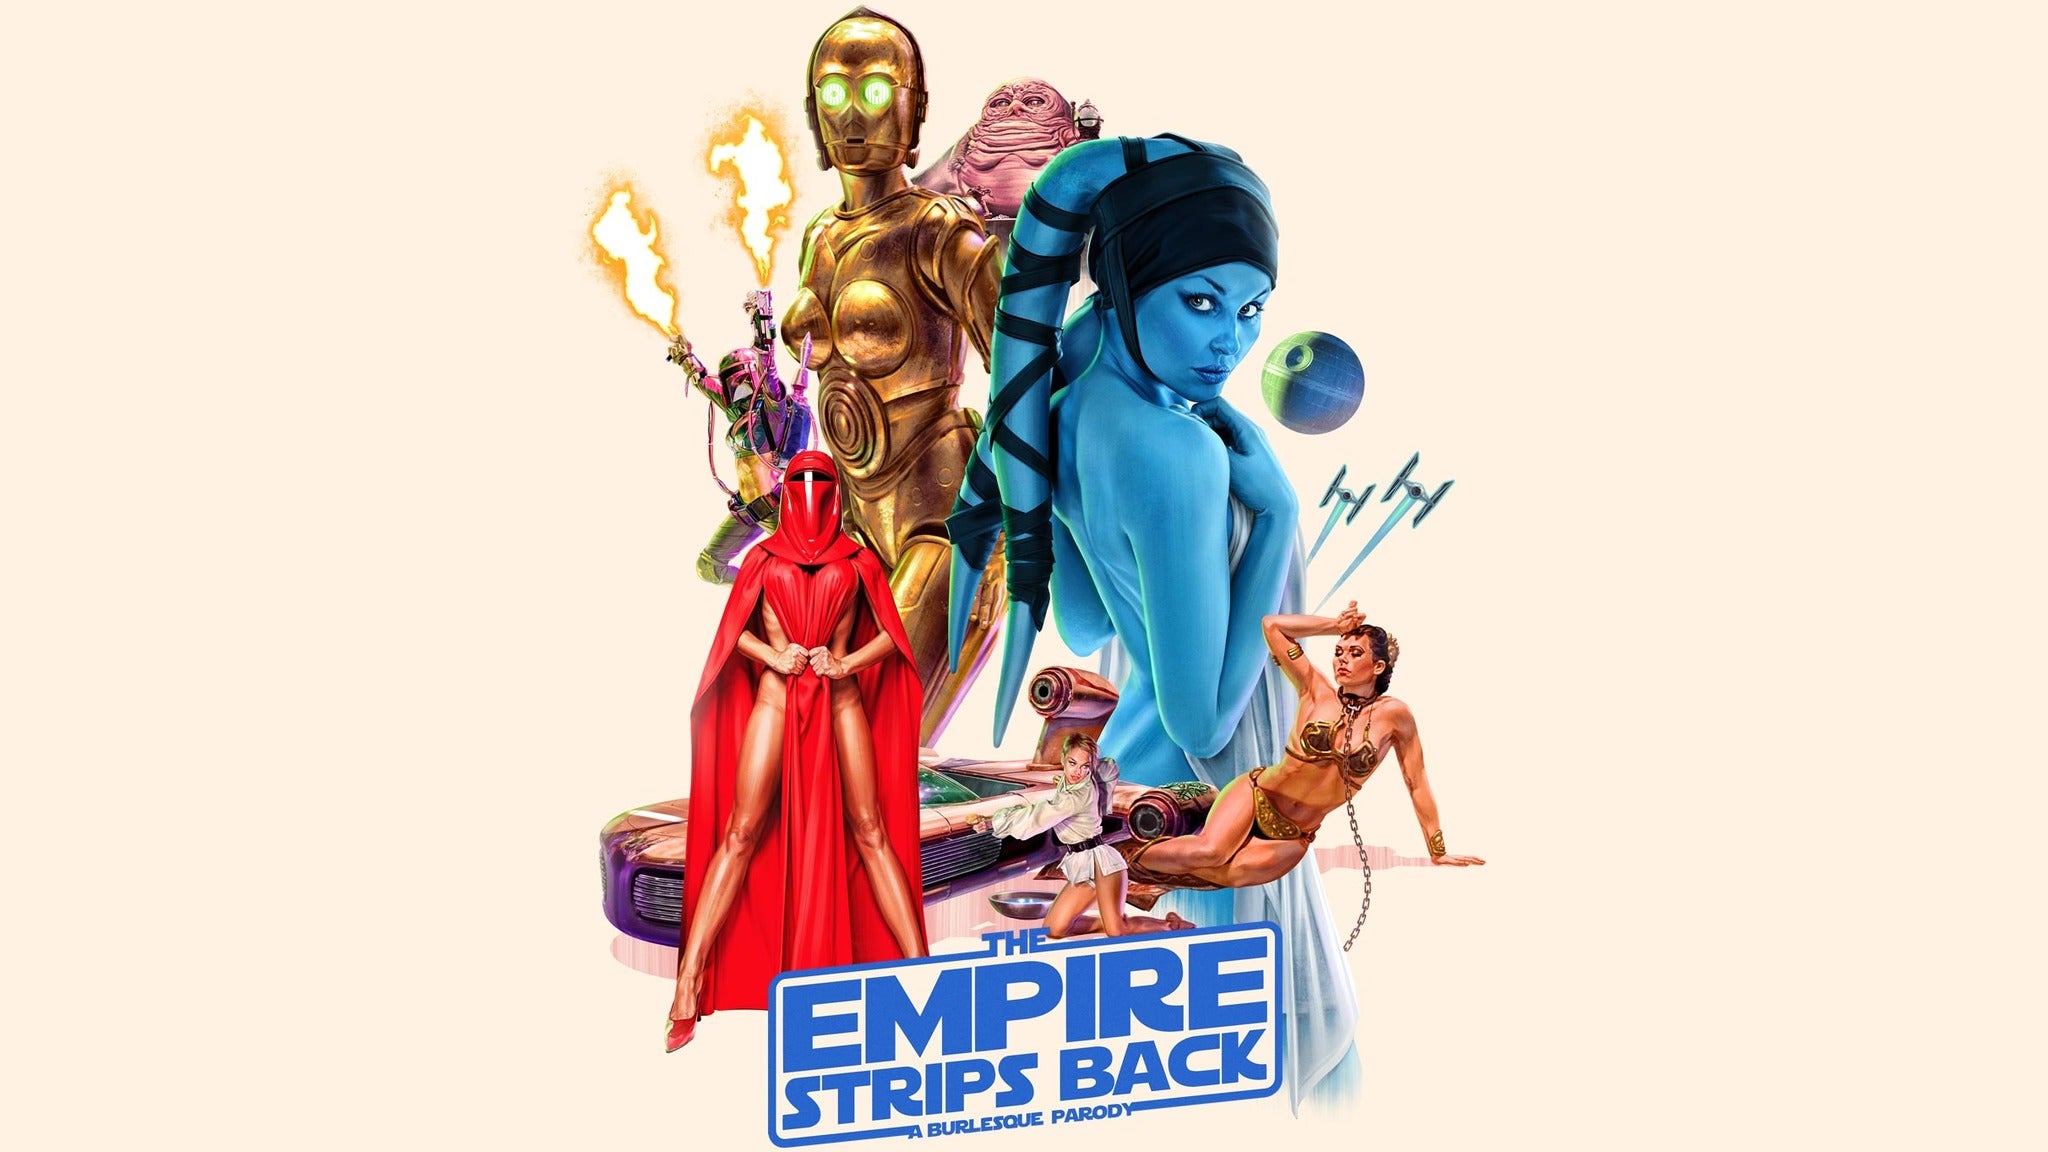 The Empire Strips Back: A Burlesque Parody in Phoenix promo photo for VIP Package Onsale presale offer code